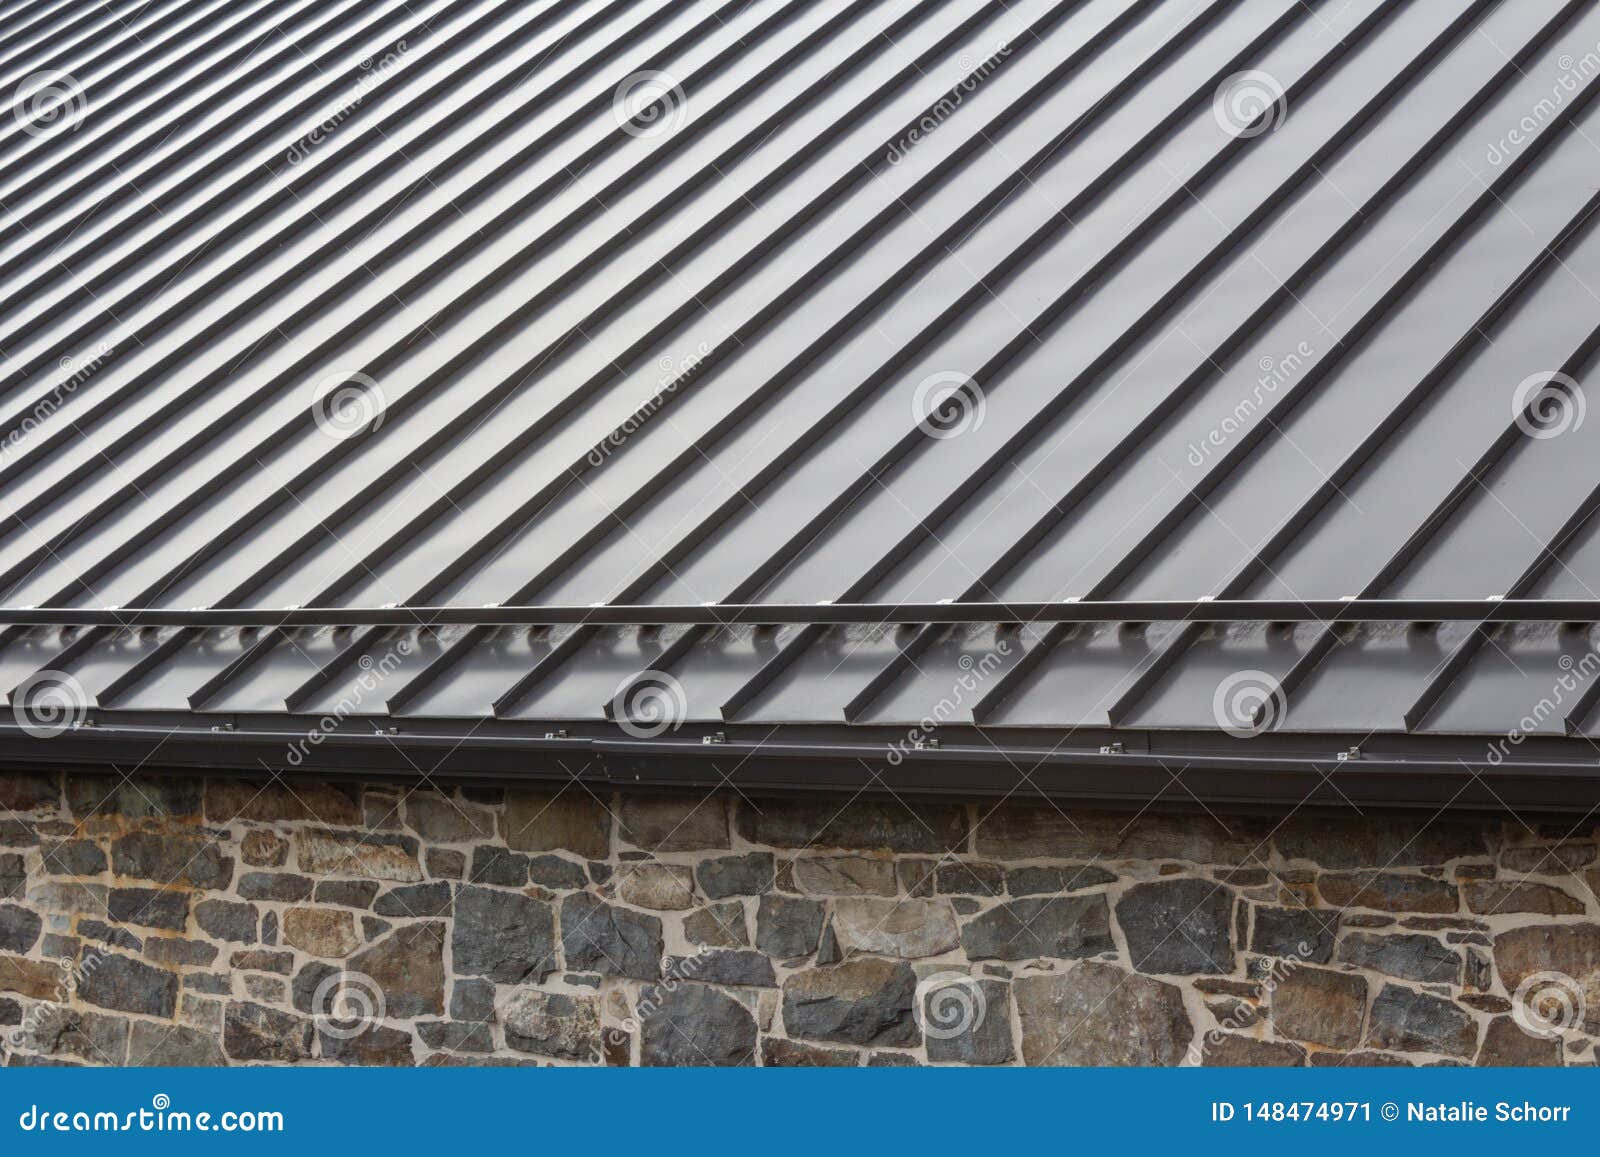 standing seam modern metal roof over vintage stone wall